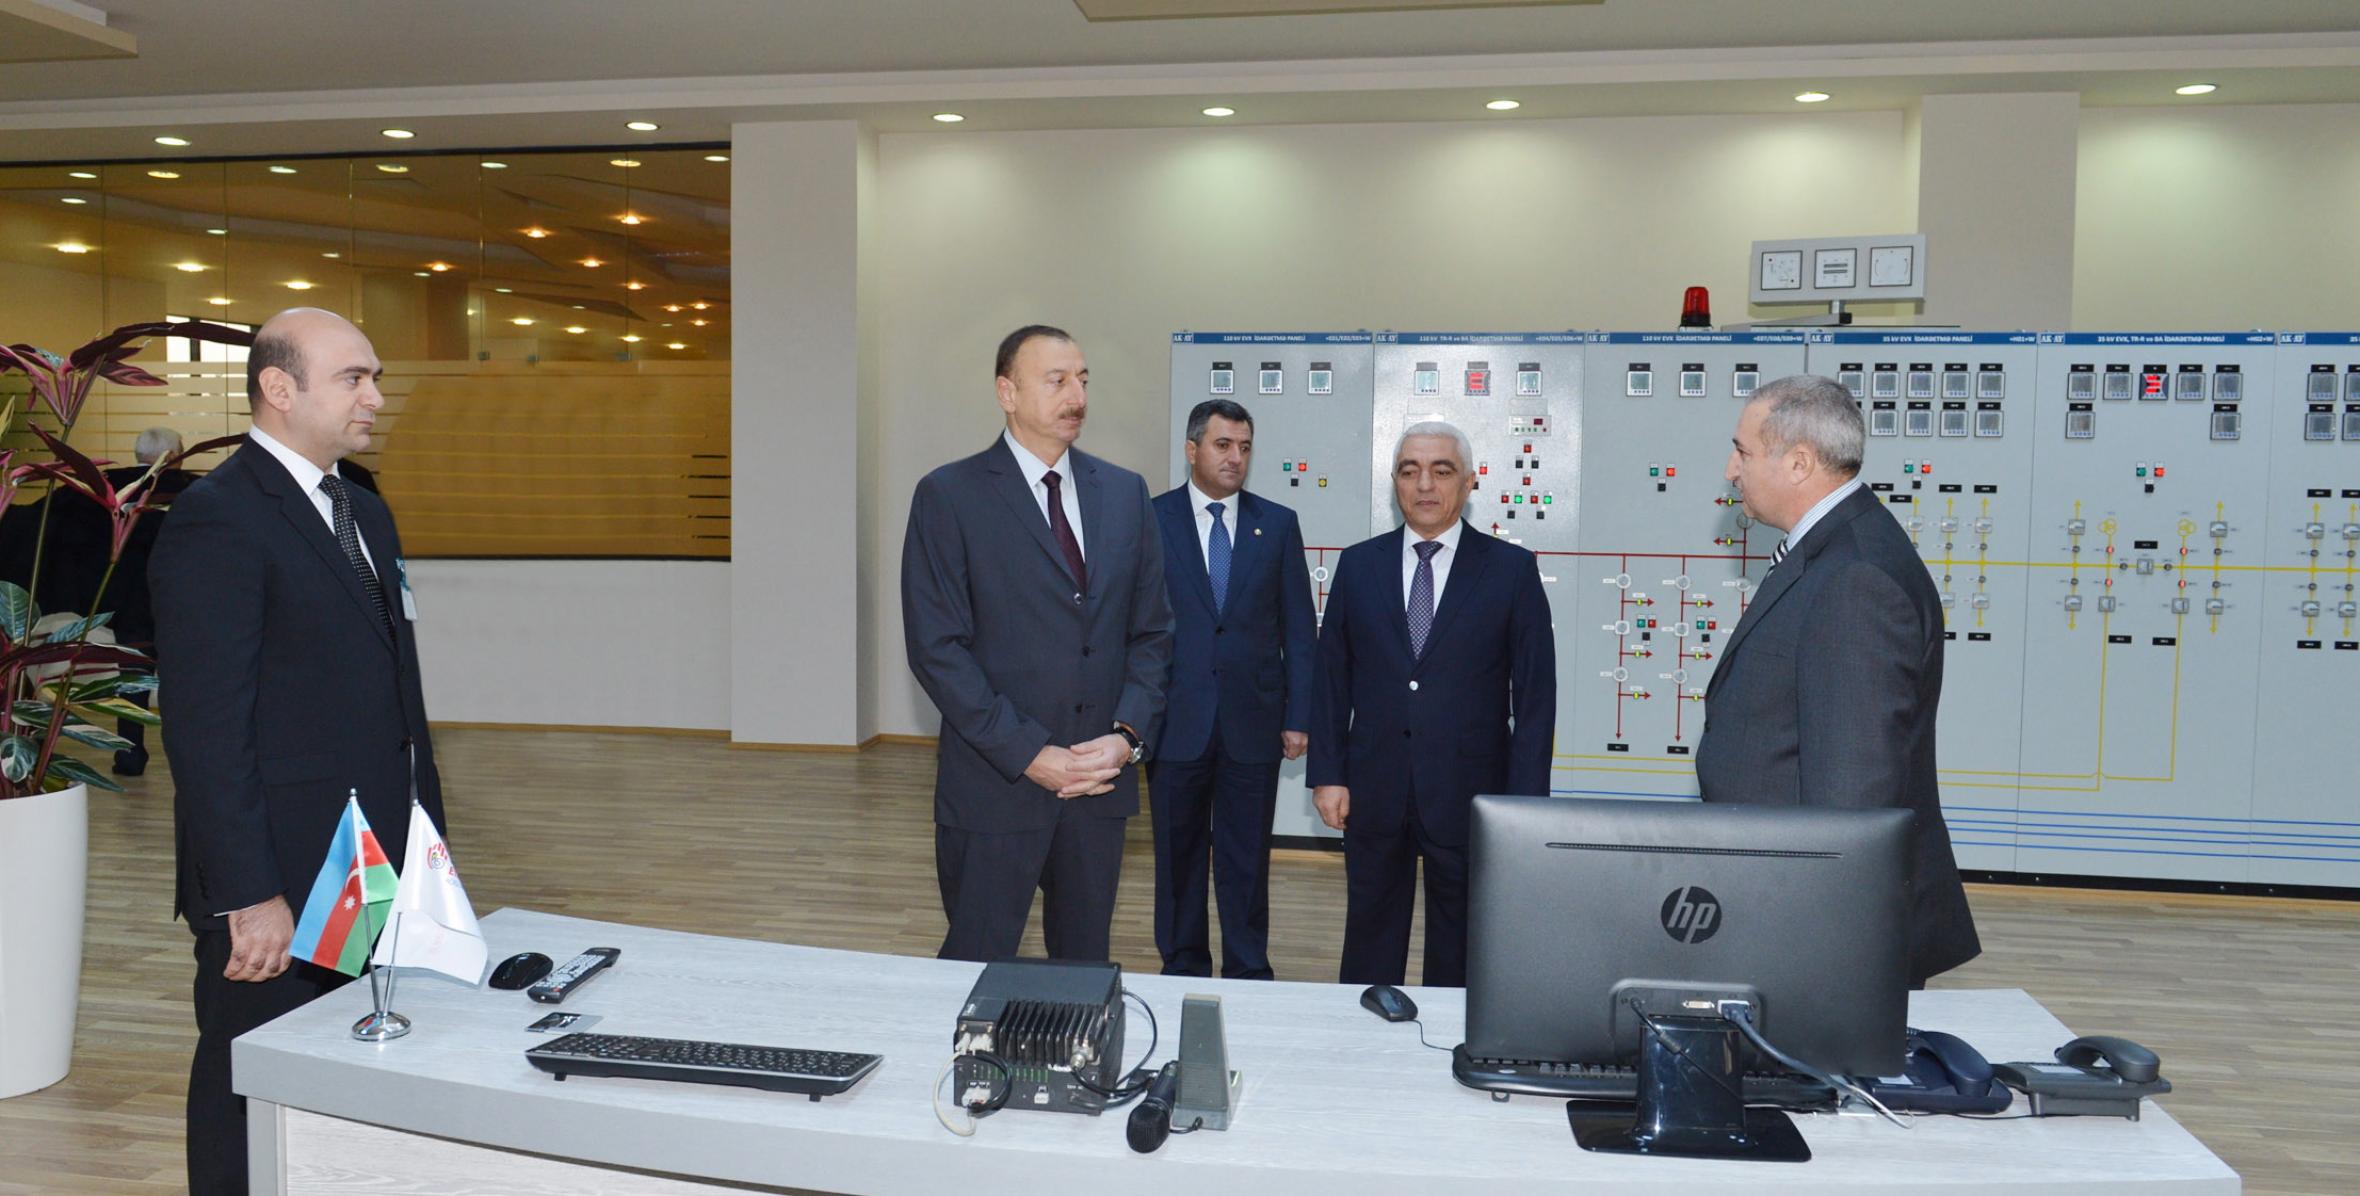 Ilham Aliyev attended the ceremony to commission new substations and office buildings of the “BakiElektrikShebeke” Open Joint-Stock Company